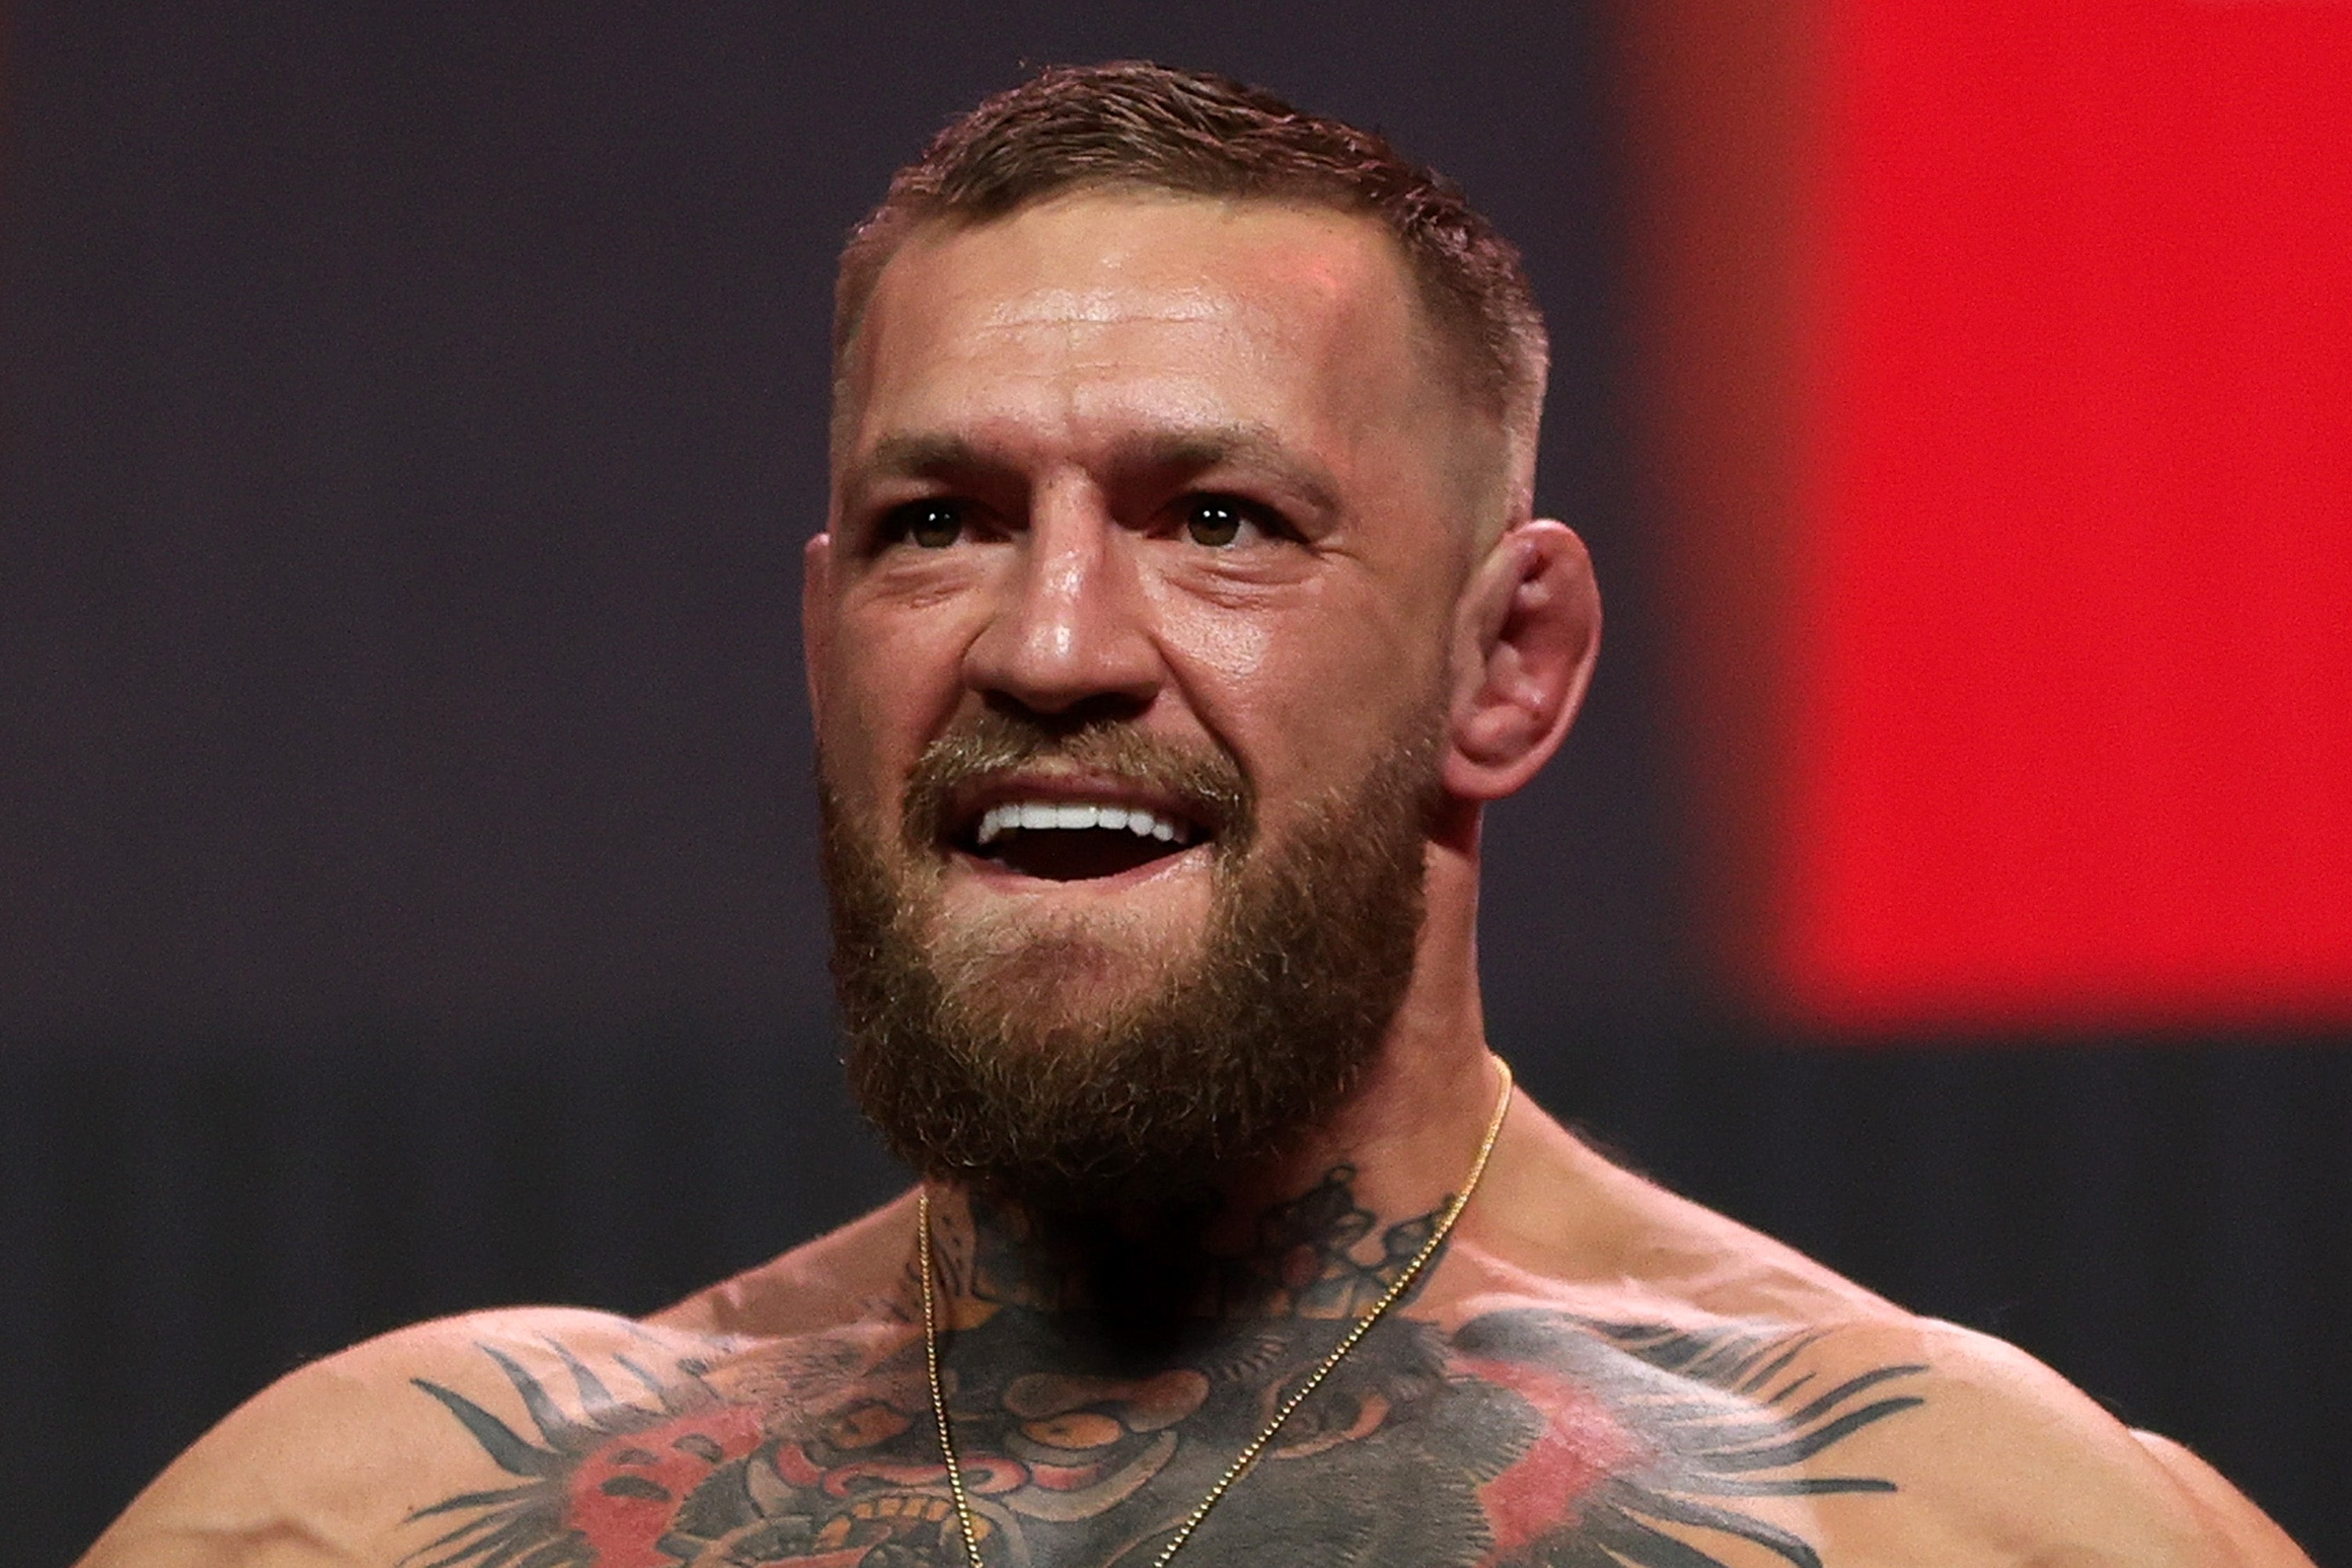 Conor McGregor did not appear at Wrestlemania 38